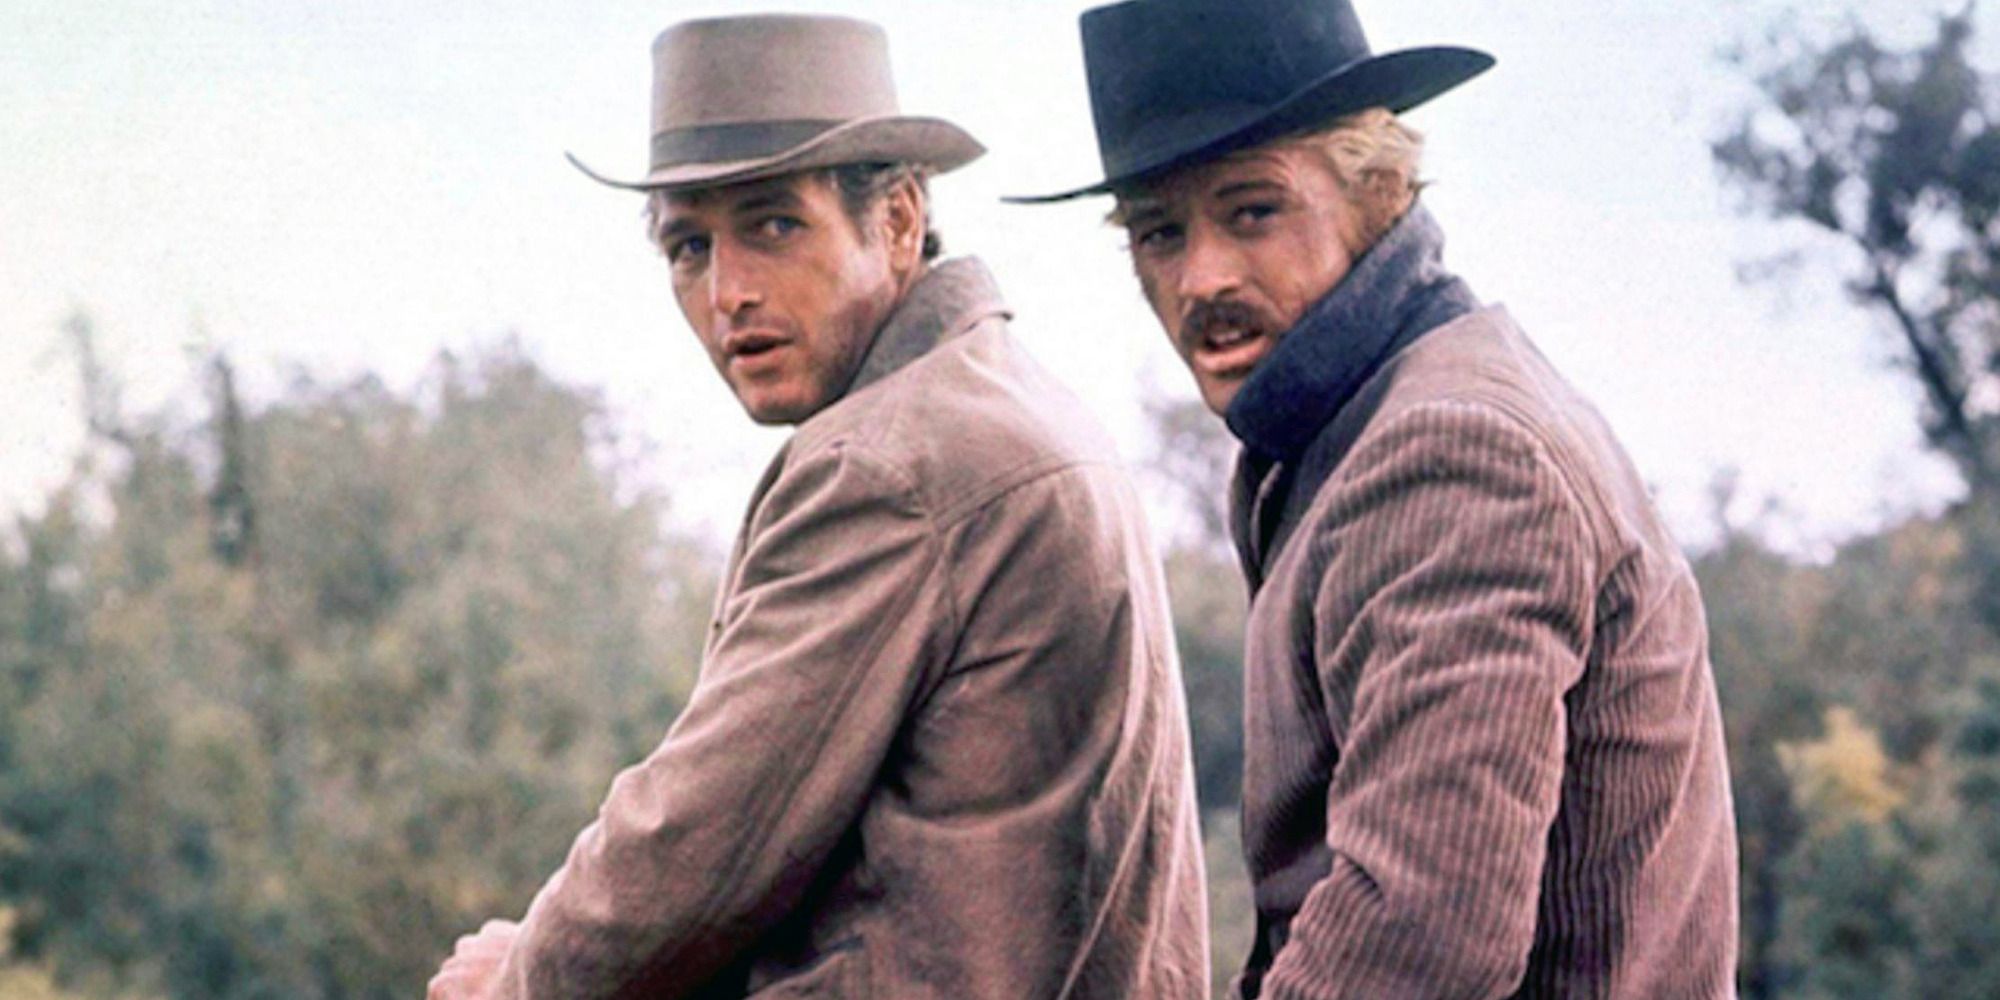 Paul Newman as Cassidy and Robert Redford as Sundance on horseback turning to face the camera in Butch Cassidy and the Sundance Kid